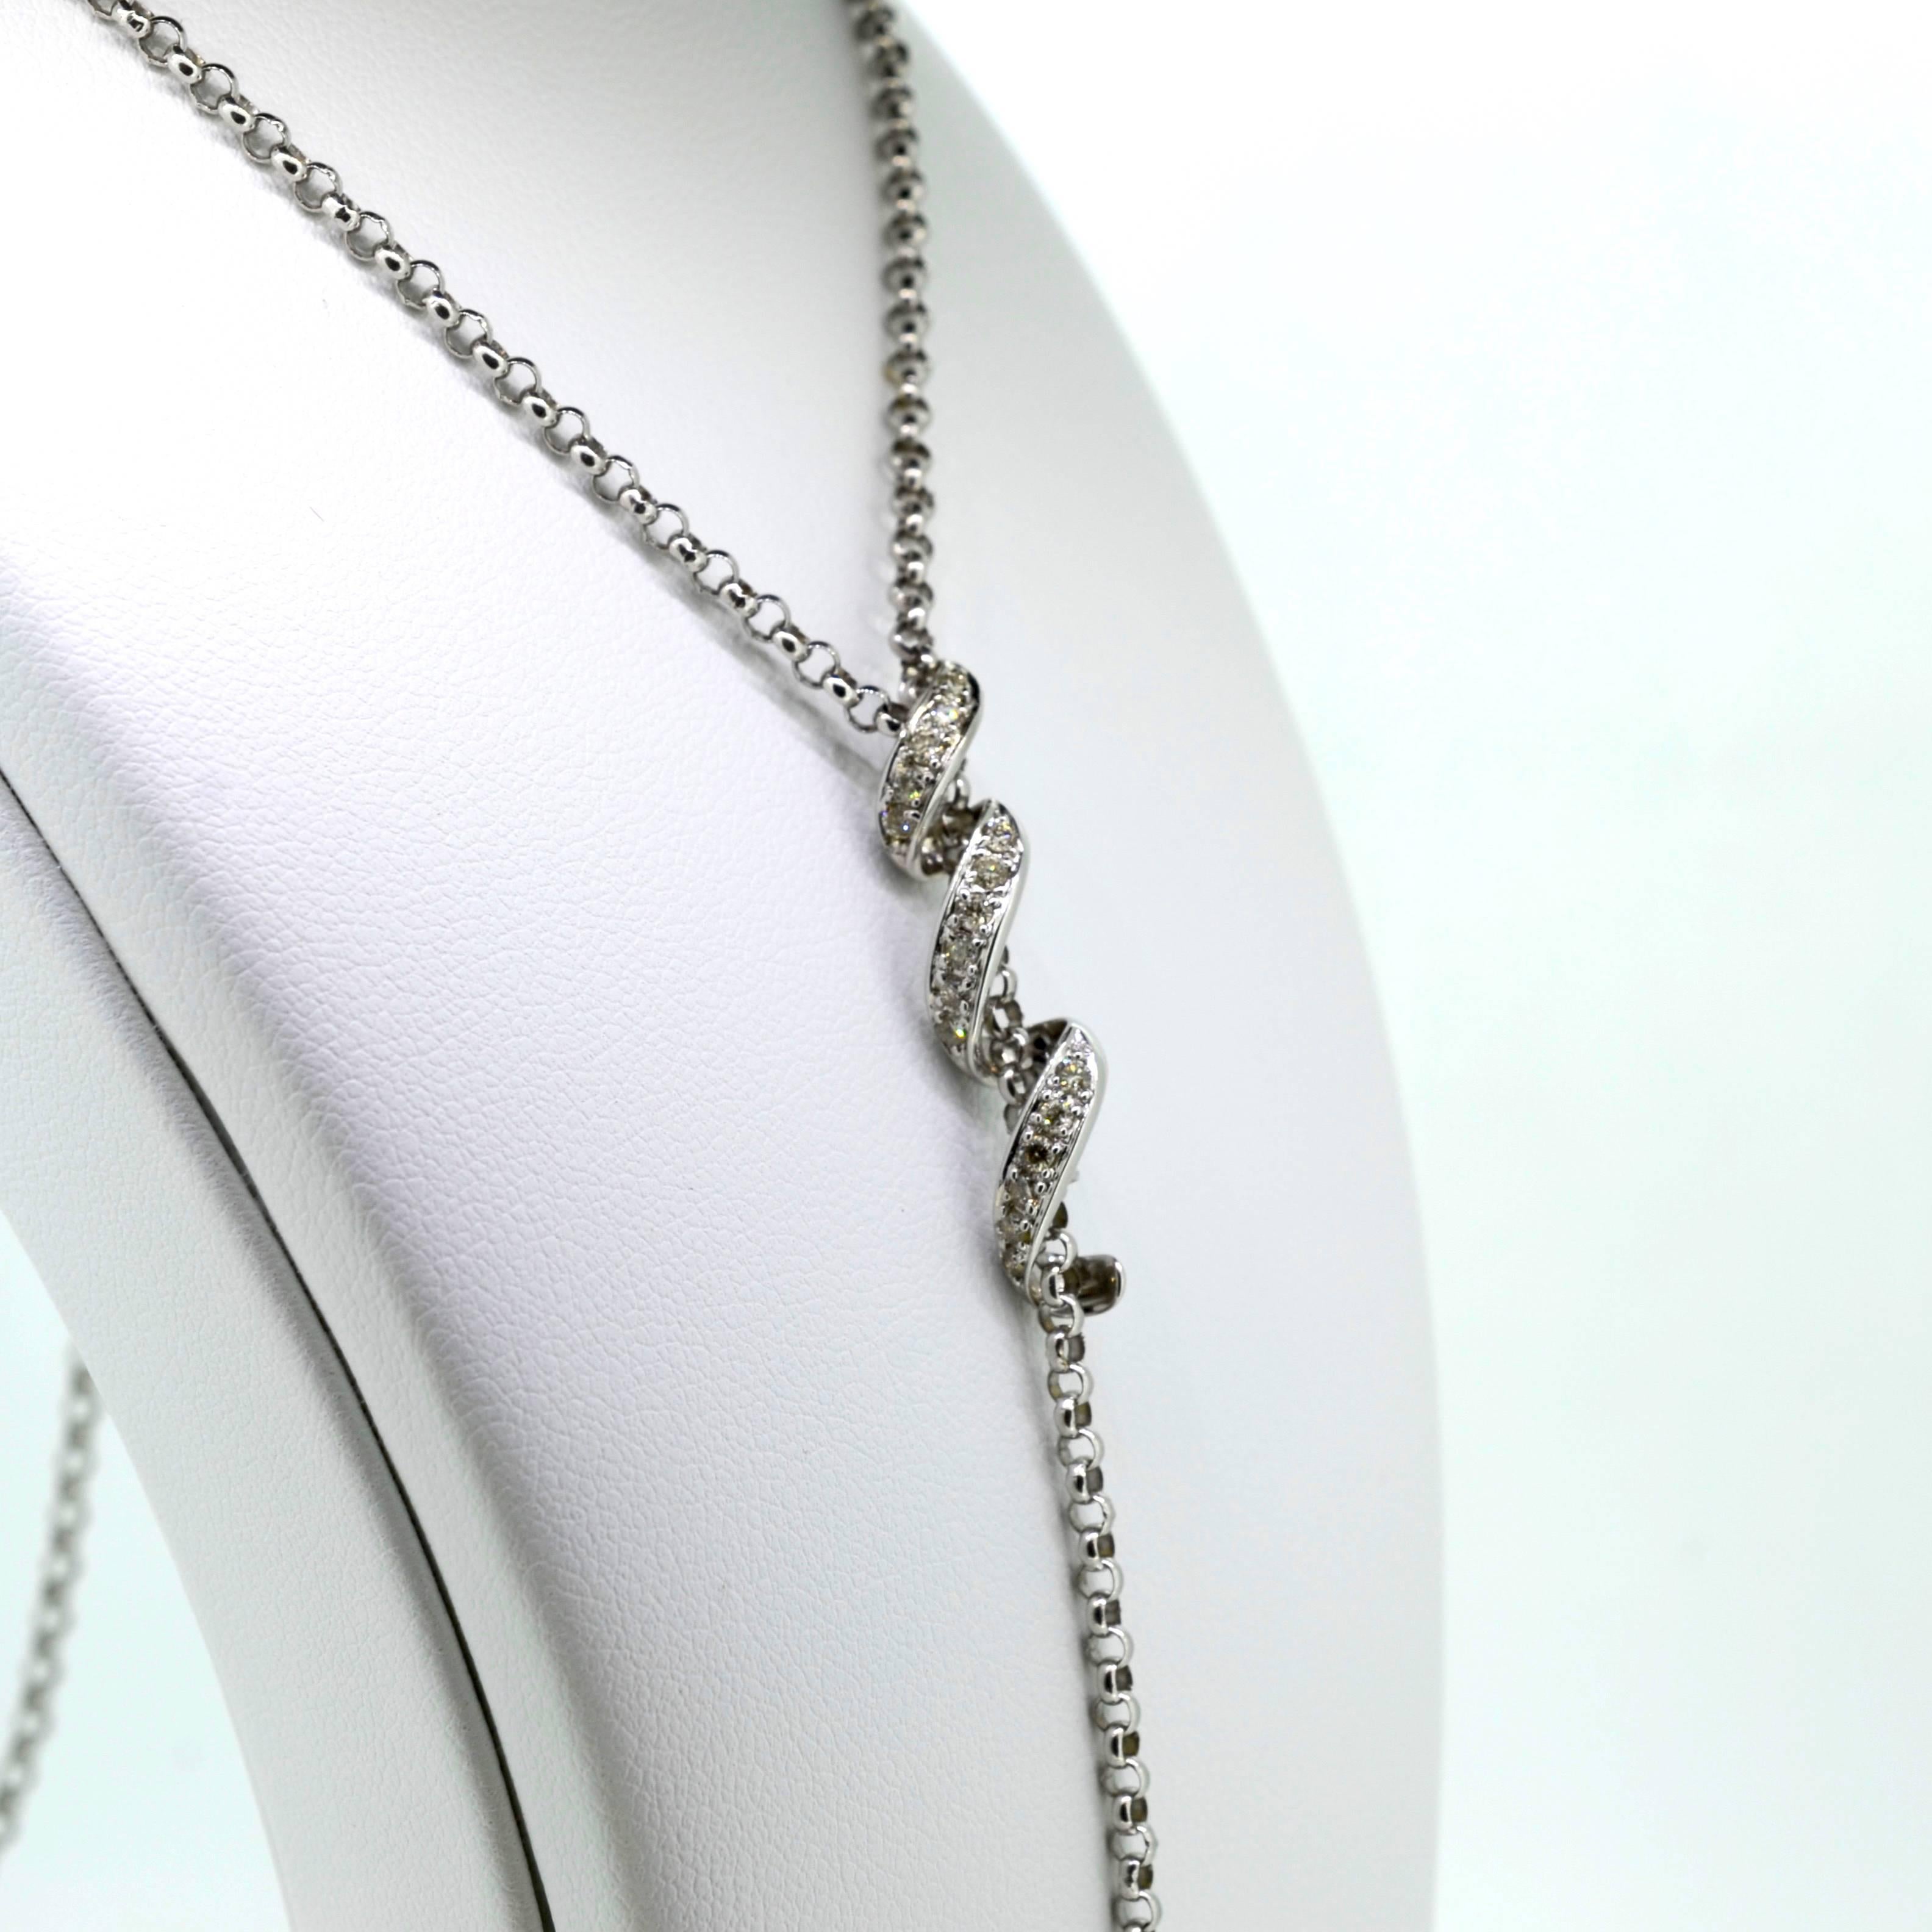 Graceful lariat;  14 kt white gold slide with adjustable length.  The slide is a white gold loose spiral pave set with diamonds.    
.41 ct. TW full cut    VS clarity   color
A one inch bar dangles from the bottom of the chain.  Great with a V-neck